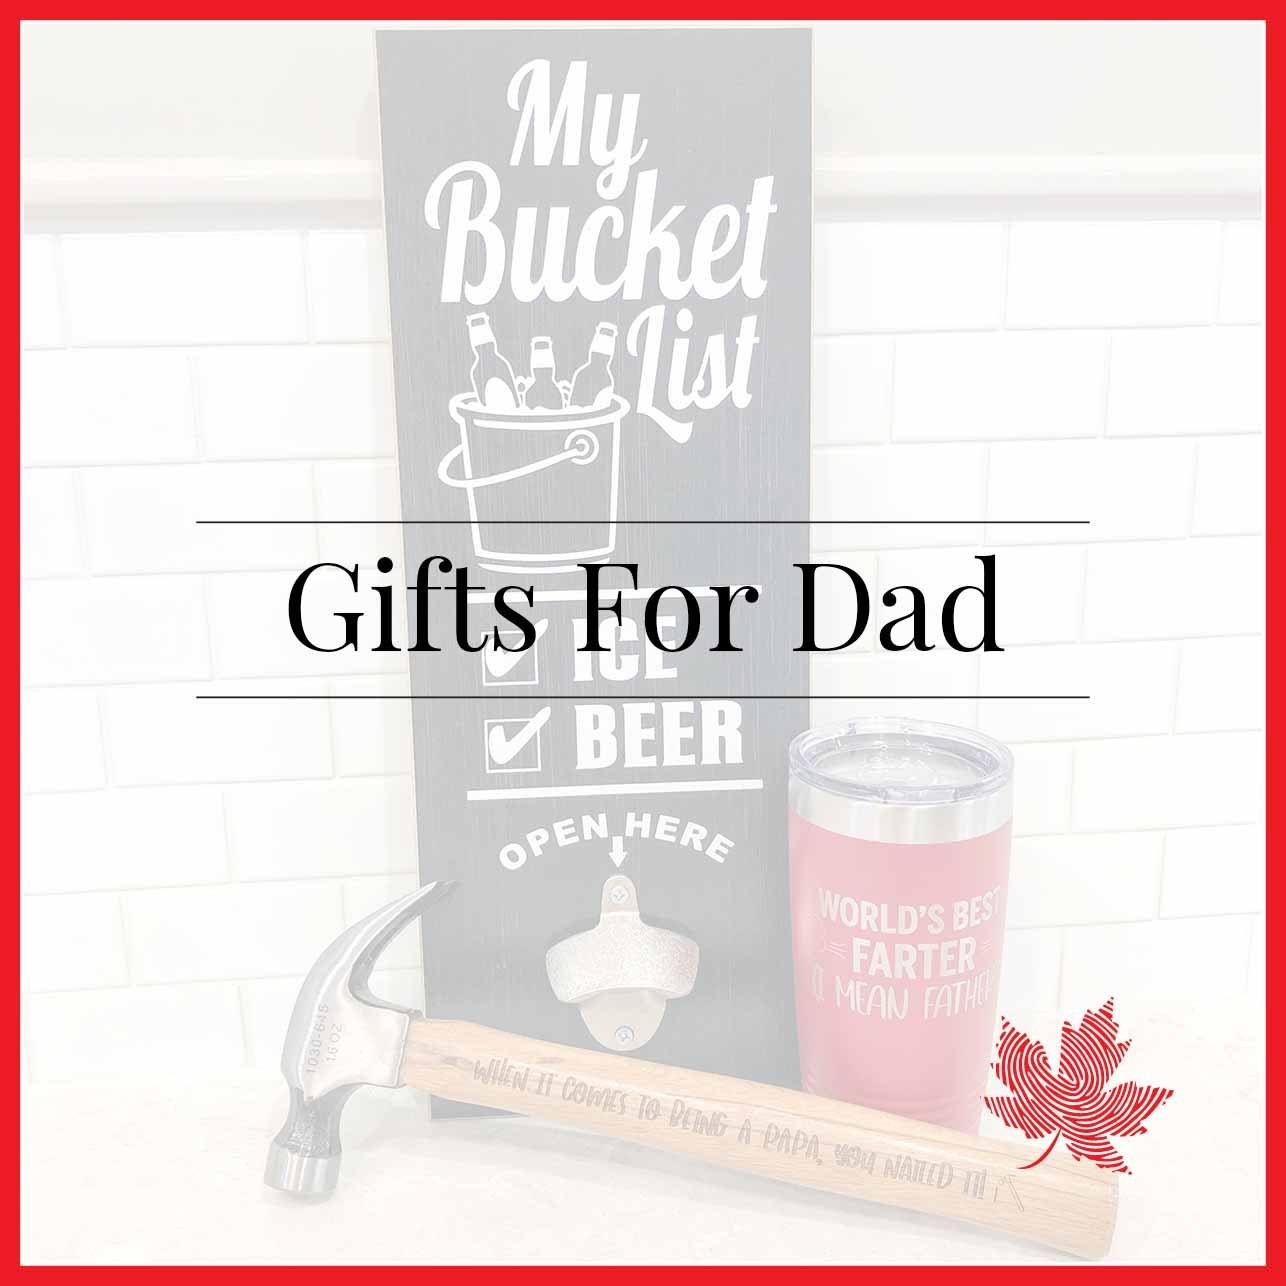 Worlds Greatest Father, I Mean Farter Boxer Briefs Gift for Dad